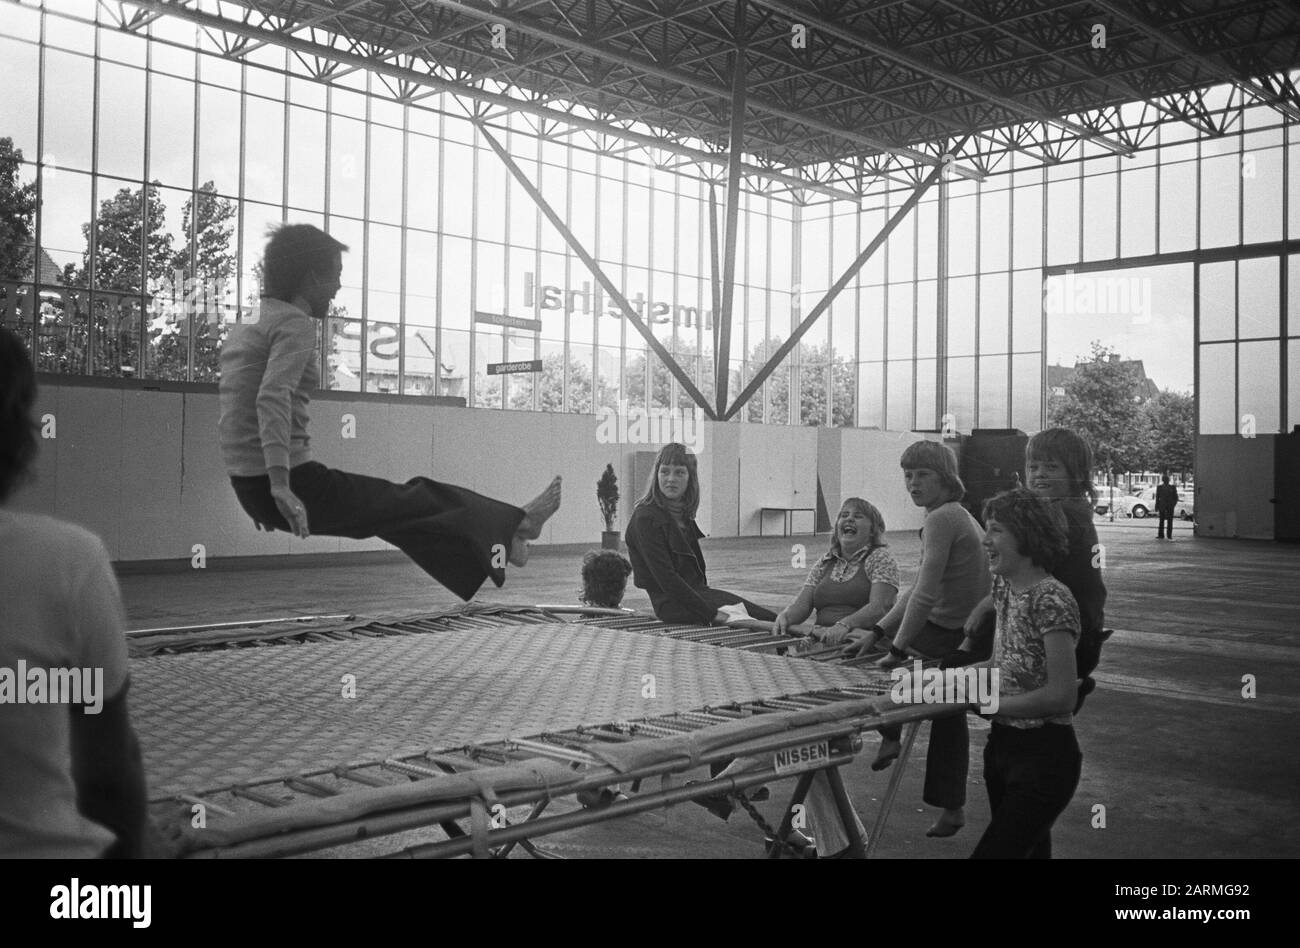 Trampolinespringen Black and White Stock Photos & Images - Alamy